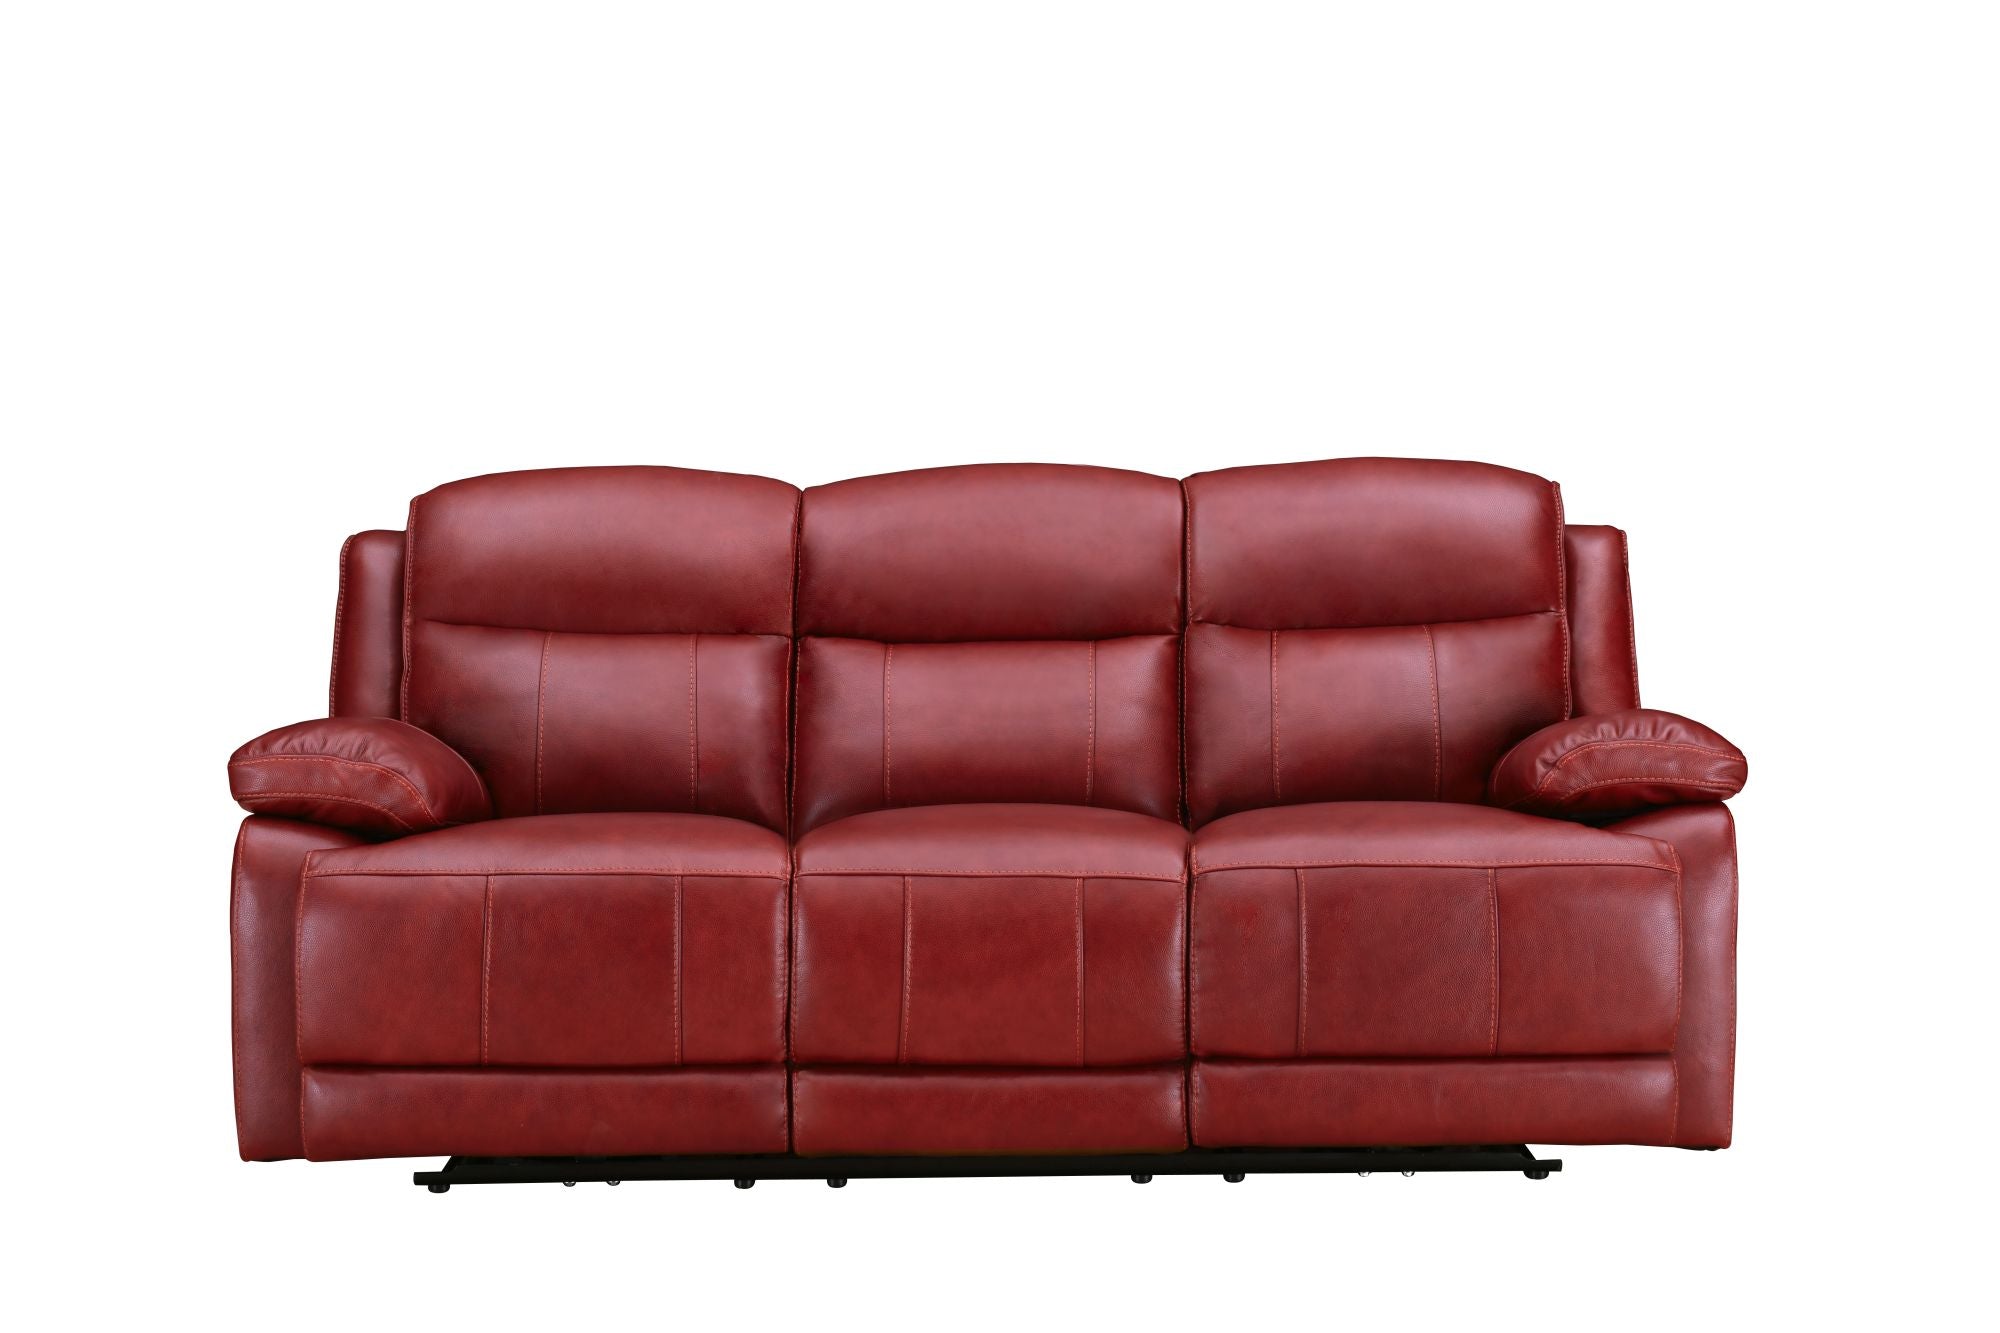 Montana 3 Seater Leather Sofa with 2 Power Recliners and Power Headrest